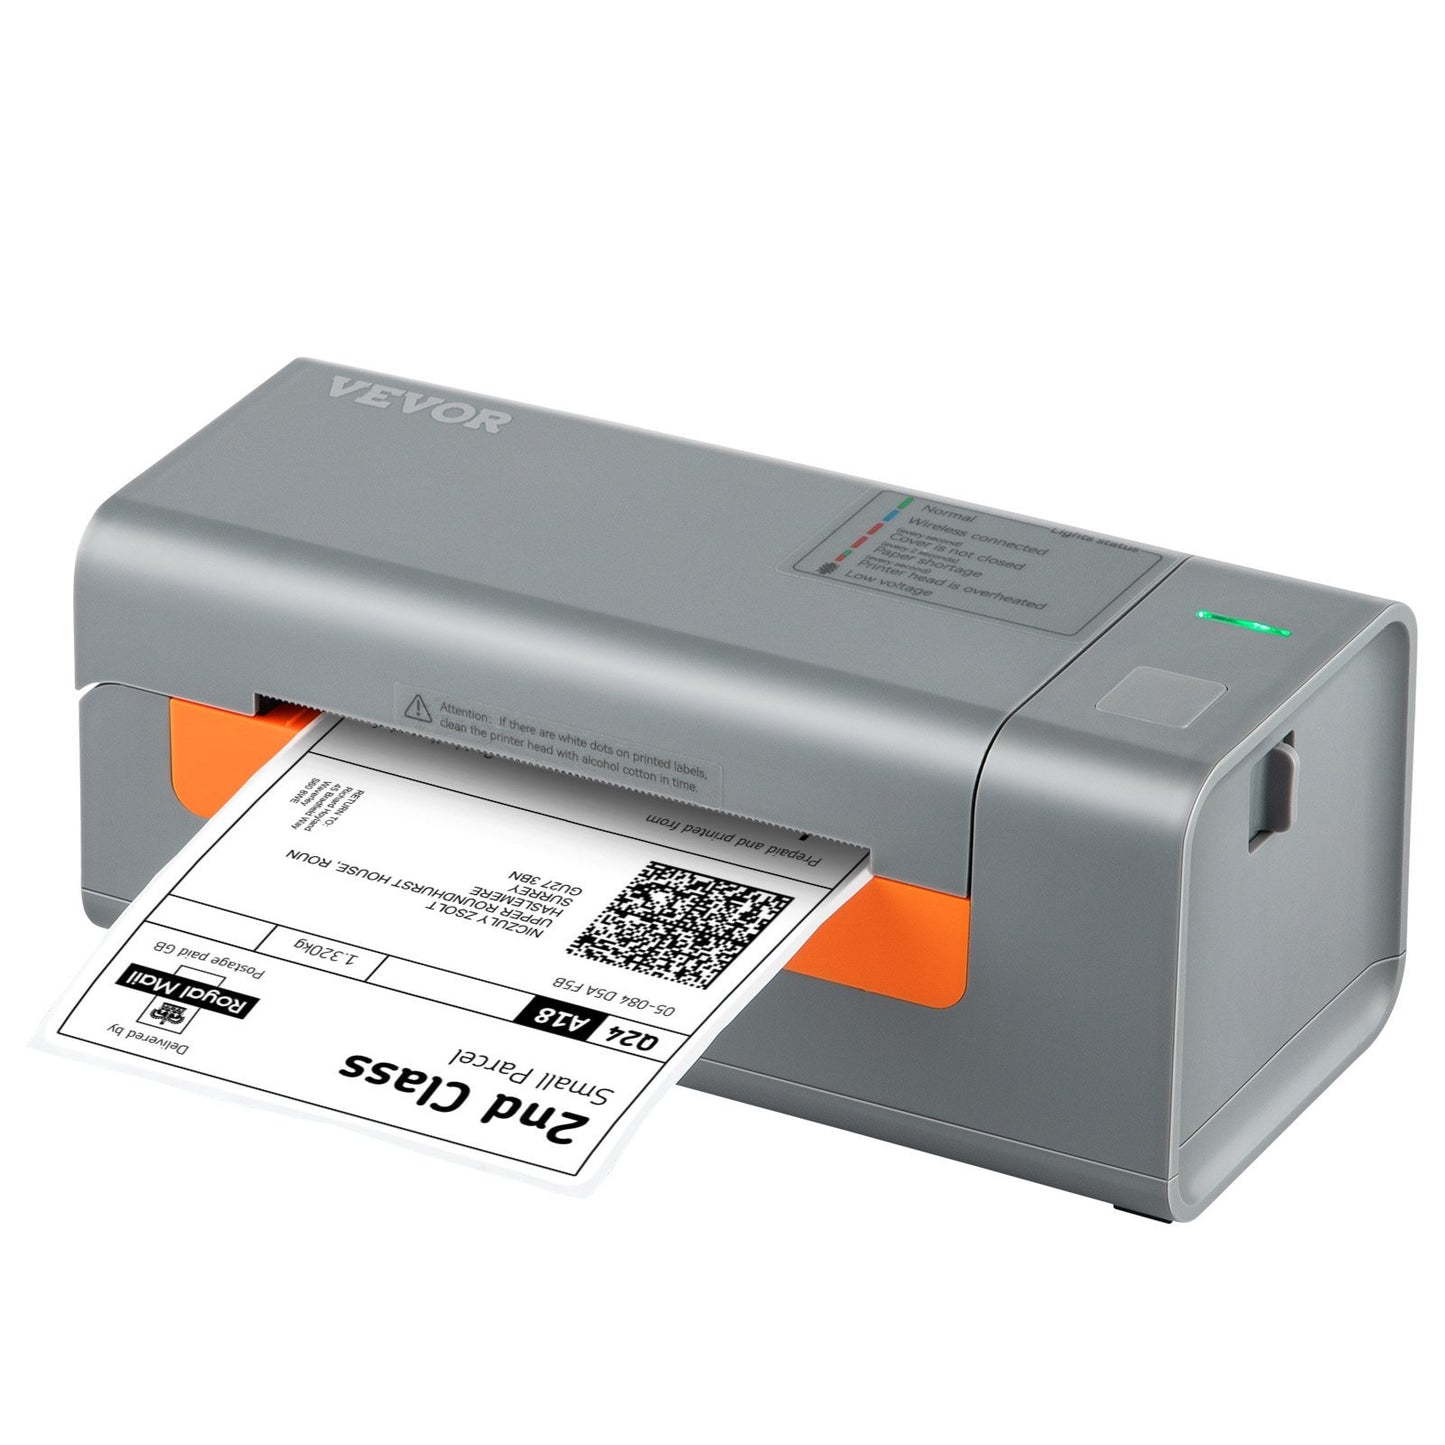 VEVOR Bluetooth Thermal Label Printer, Wireless Shipping Label Printer w/Automatic Label Recognition,Thermal Printer Supports Shipping, Barcode, Household Labels and More